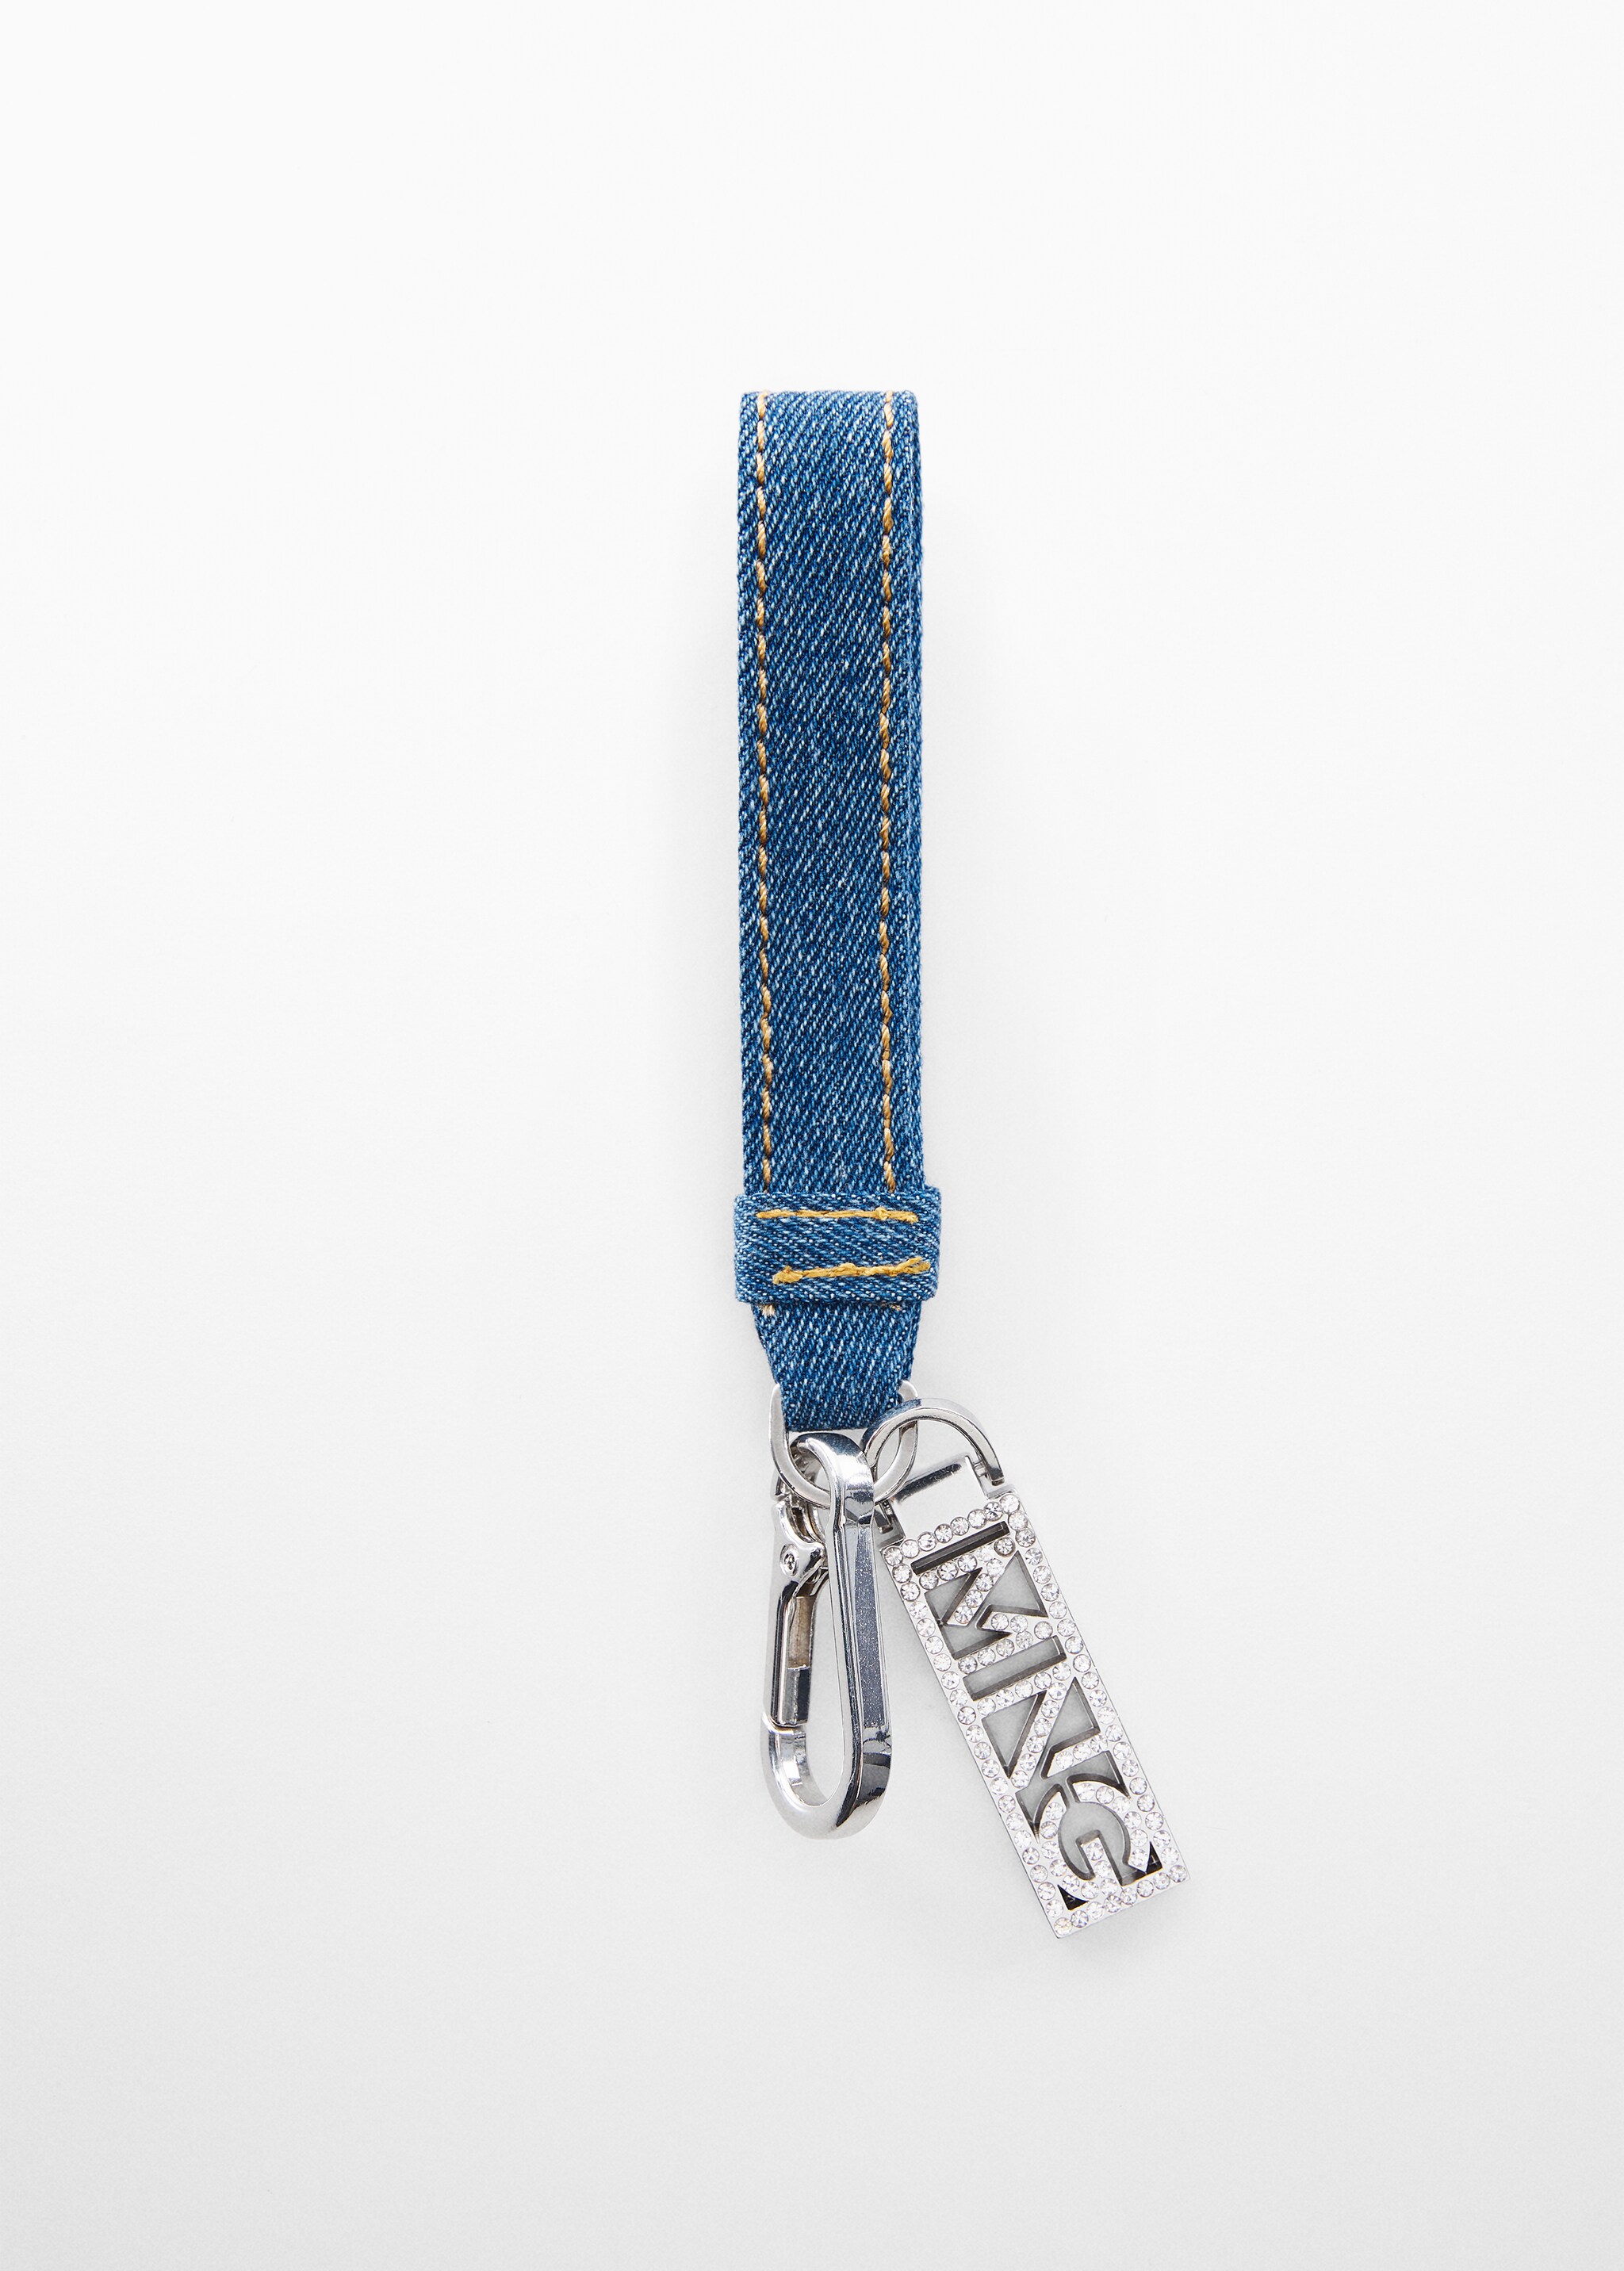 Denim key-chain - Article without model